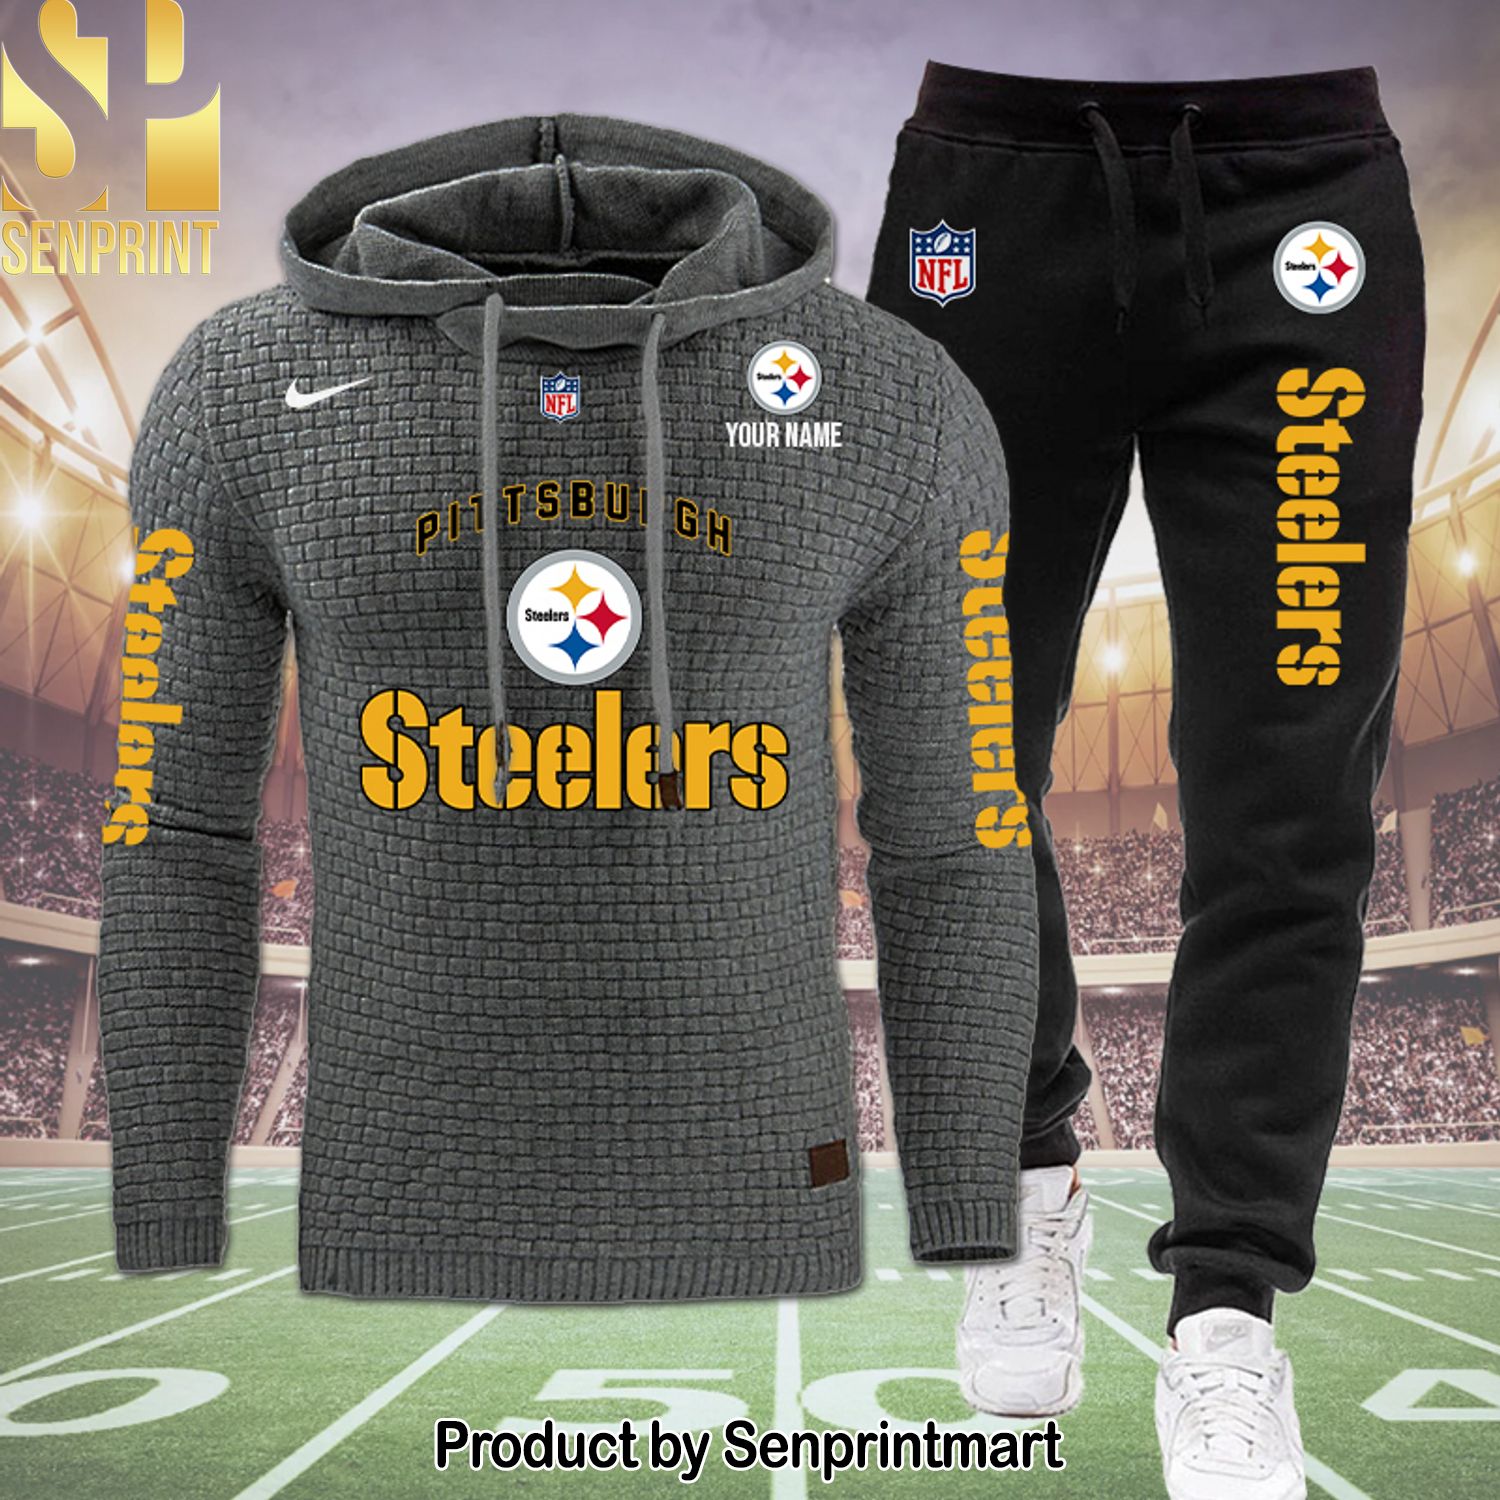 Pittsburgh Steelers New Outfit Shirt and Pants